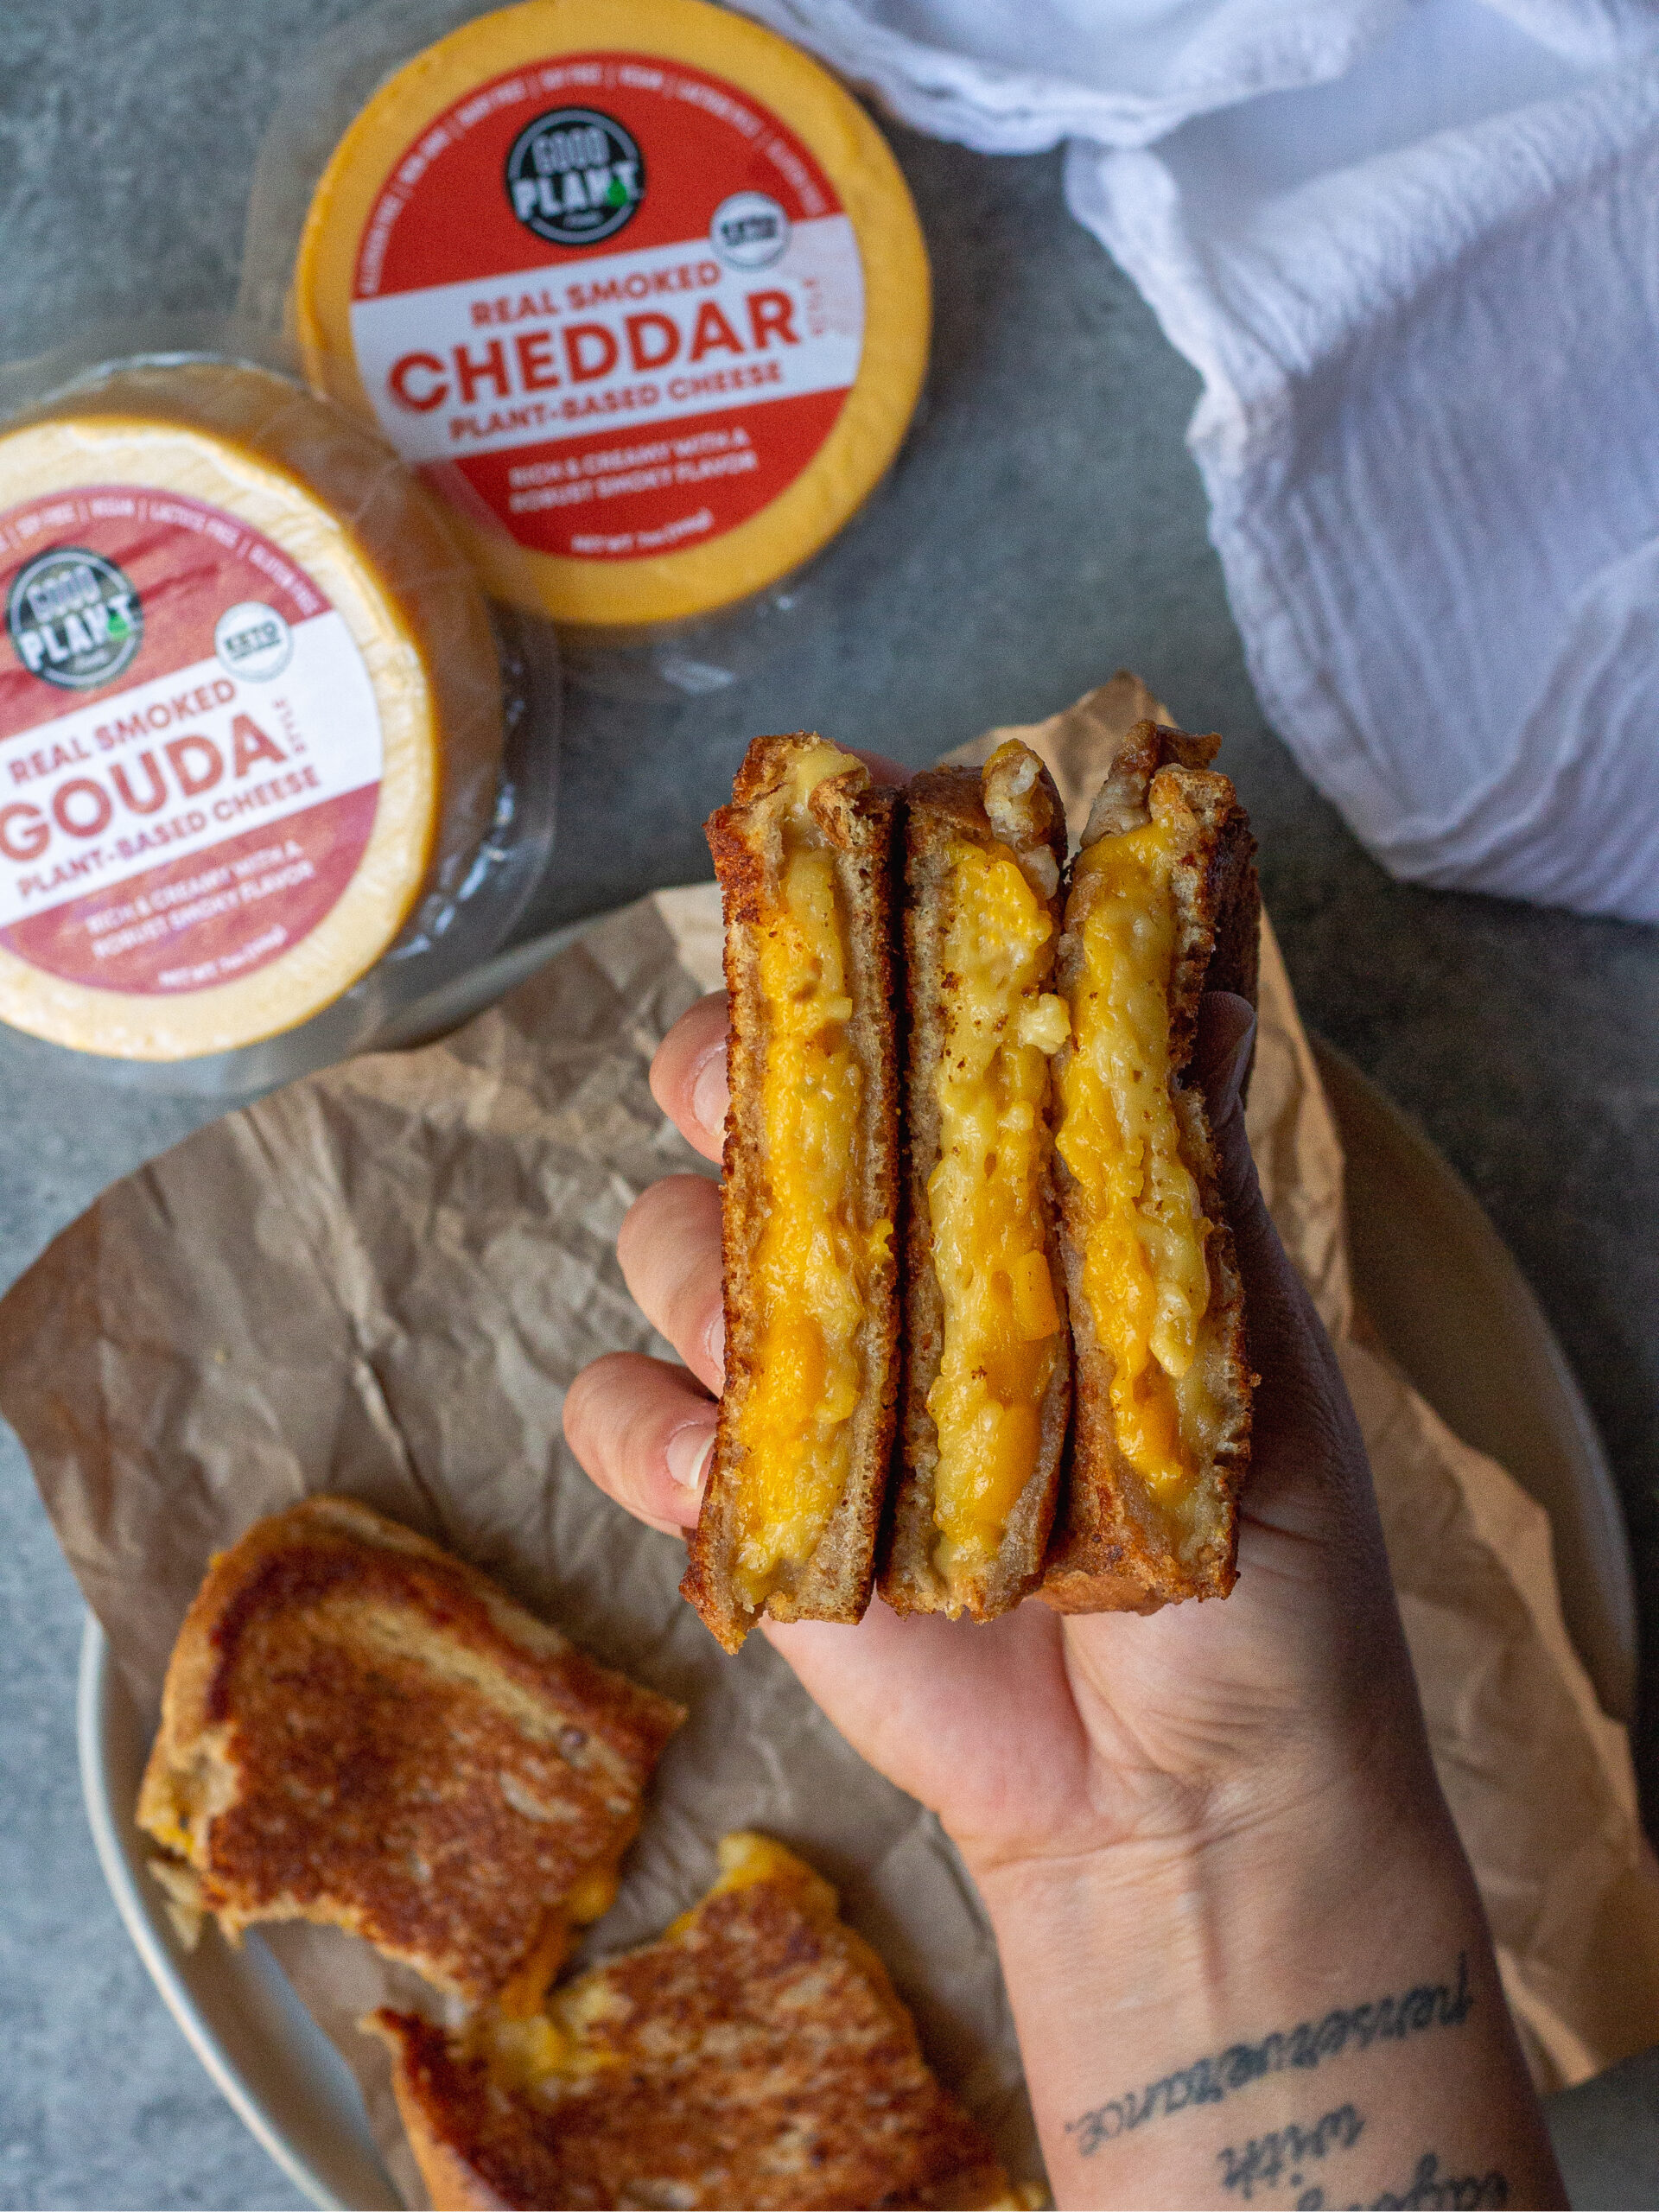 Smoked Gouda and Smoked Cheddar Grilled Cheese Sandwich